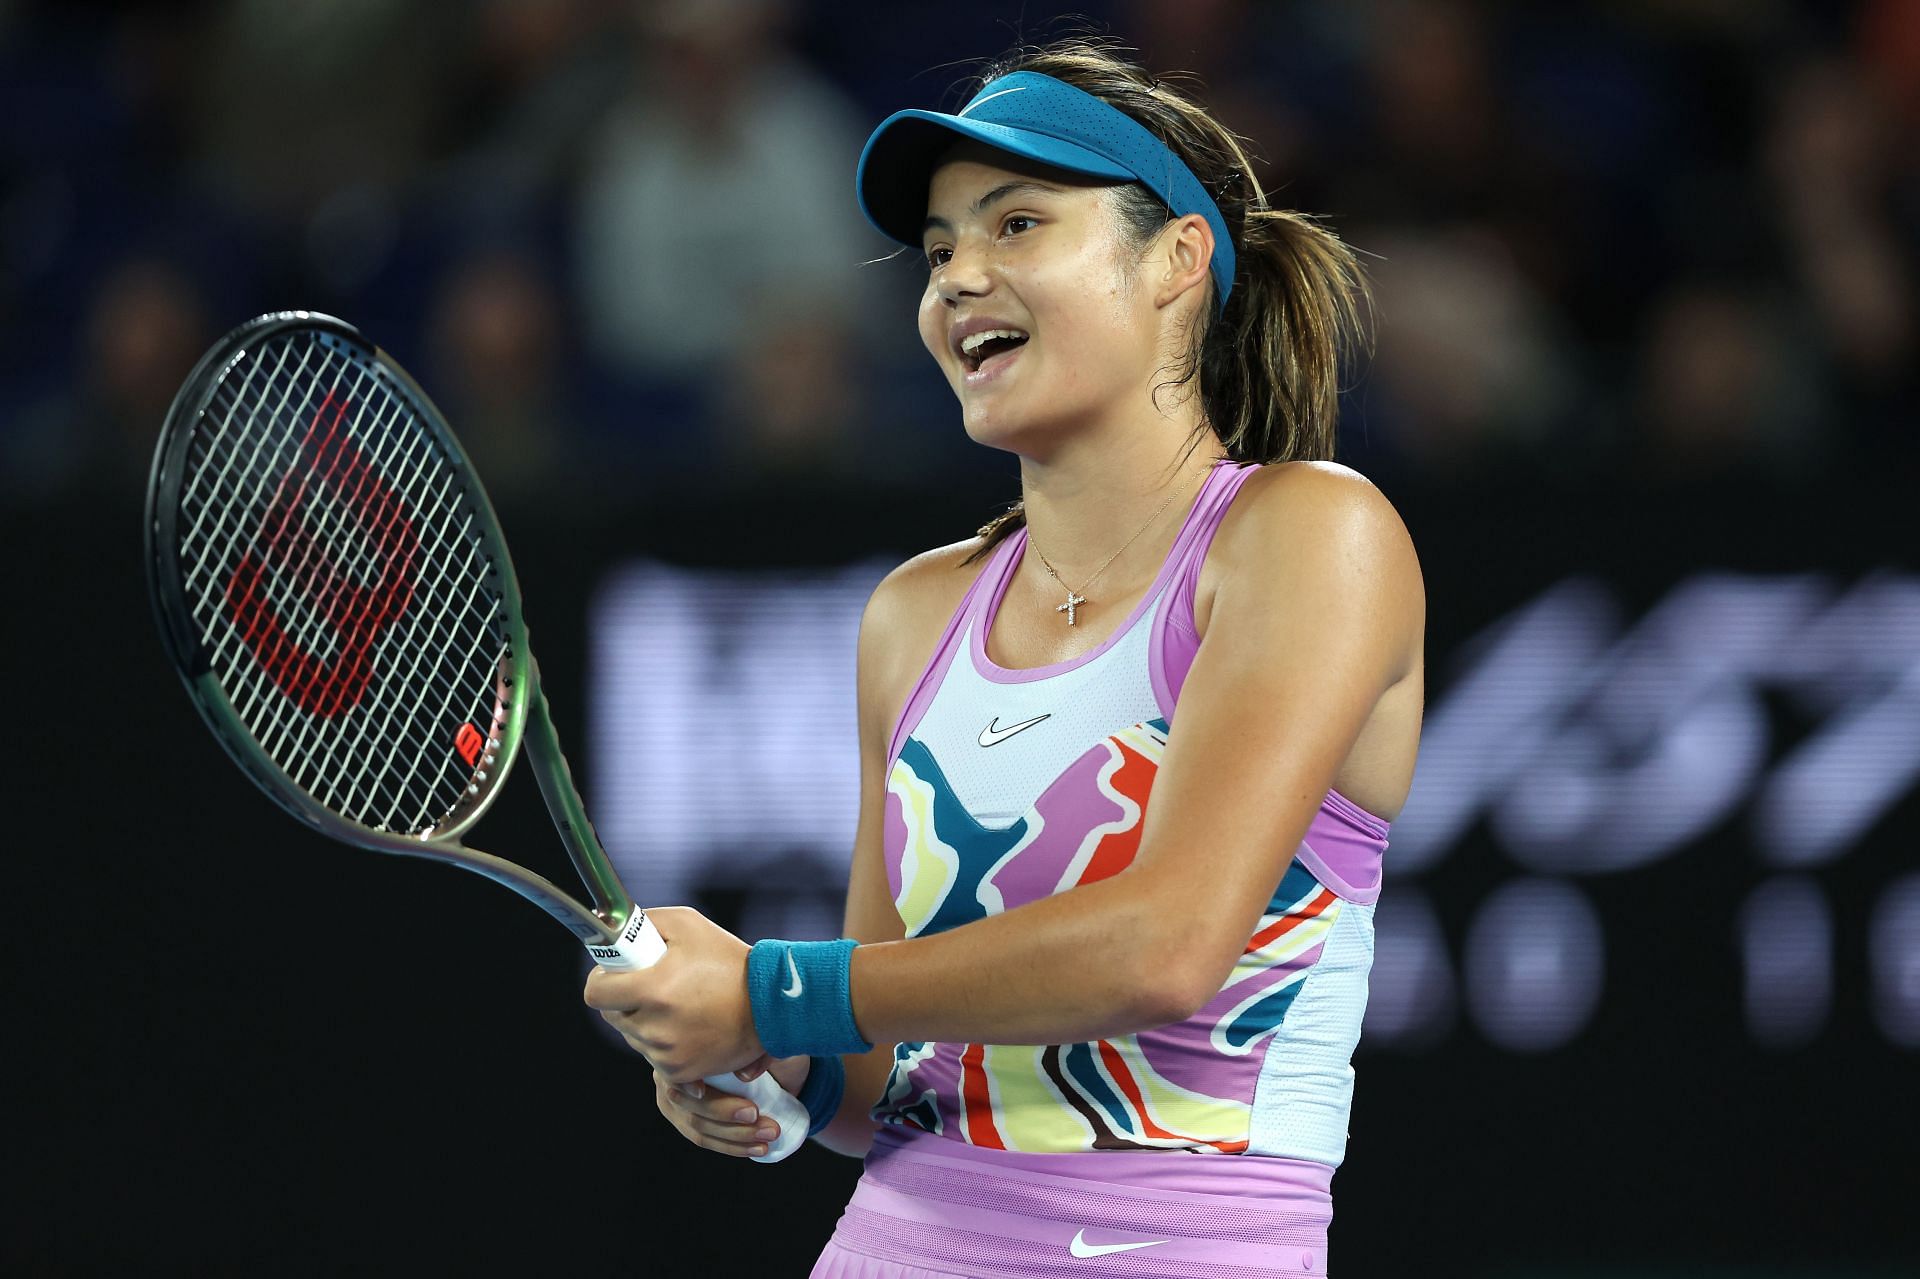 Emma Raducanu vs Bianca Andreescu Where to watch, TV schedule, live streaming details and more Miami Open 2023, Round 1